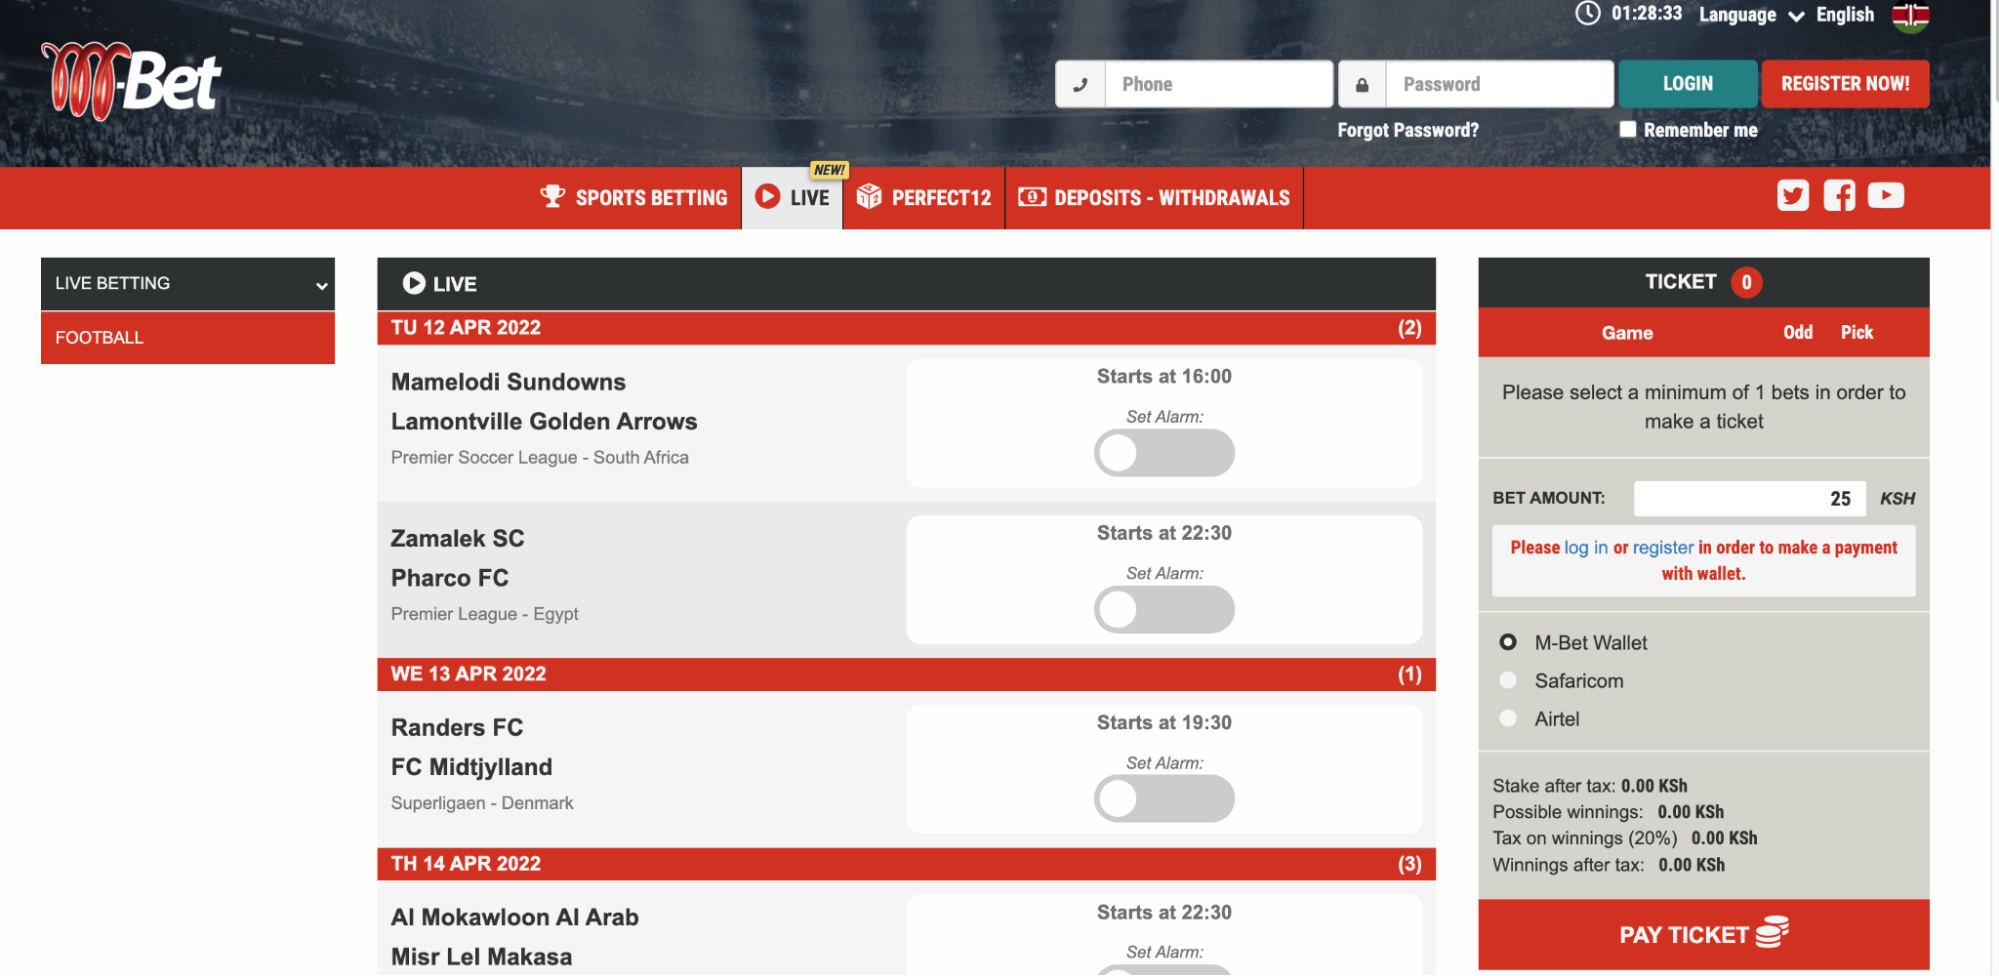 M-Bet Sportsbook Live-betting screenshots from the mobile version of the website